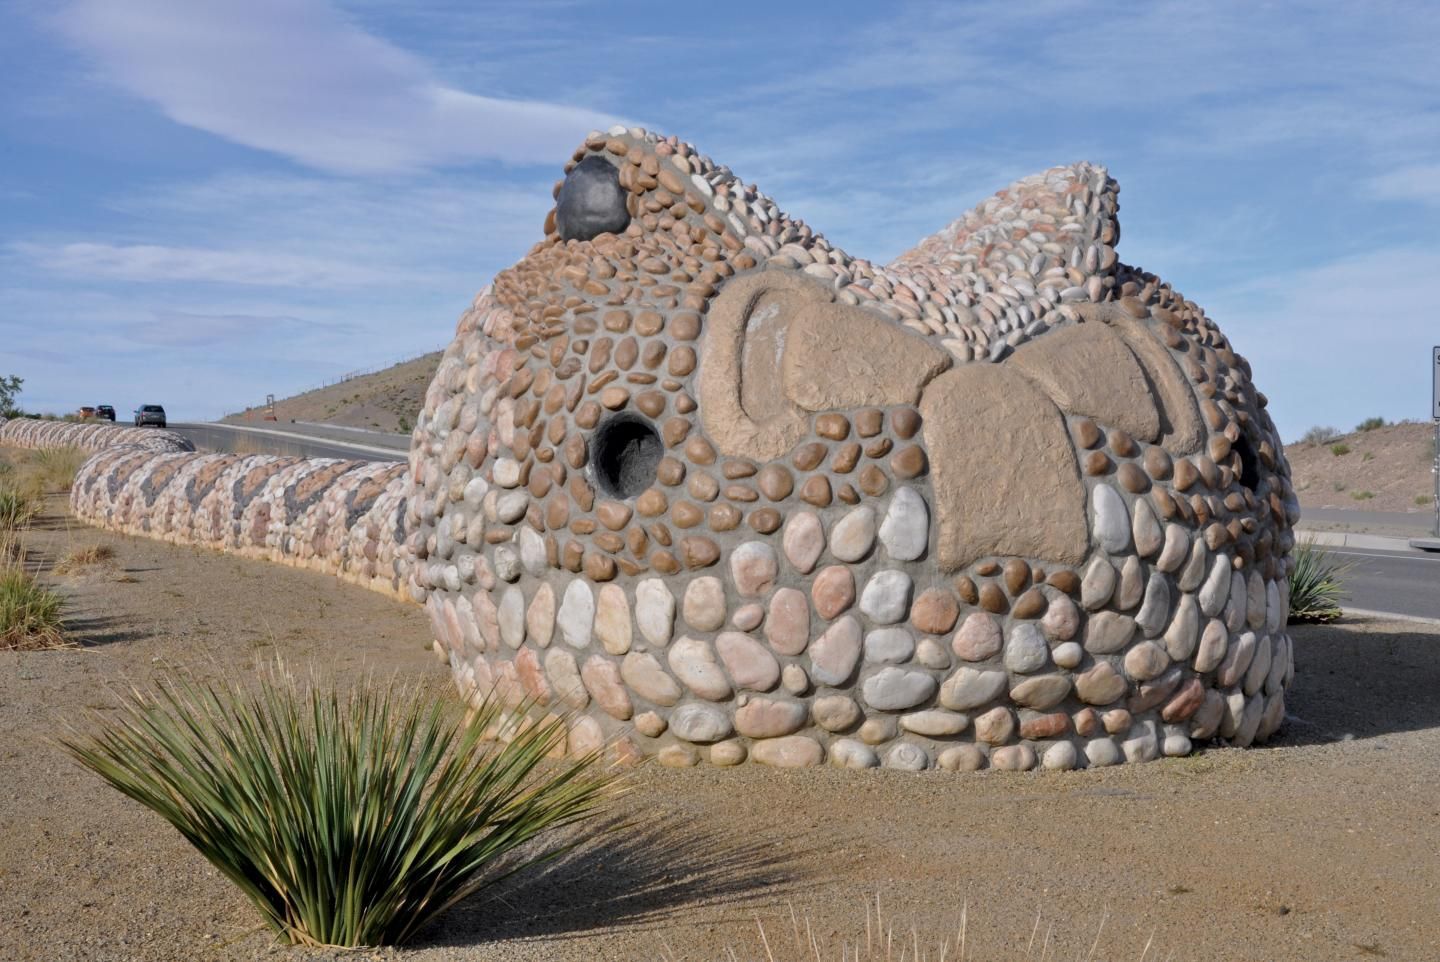 World’s Largest Rattlesnake Sculptures, world record in Albuquerque, New Mexico
